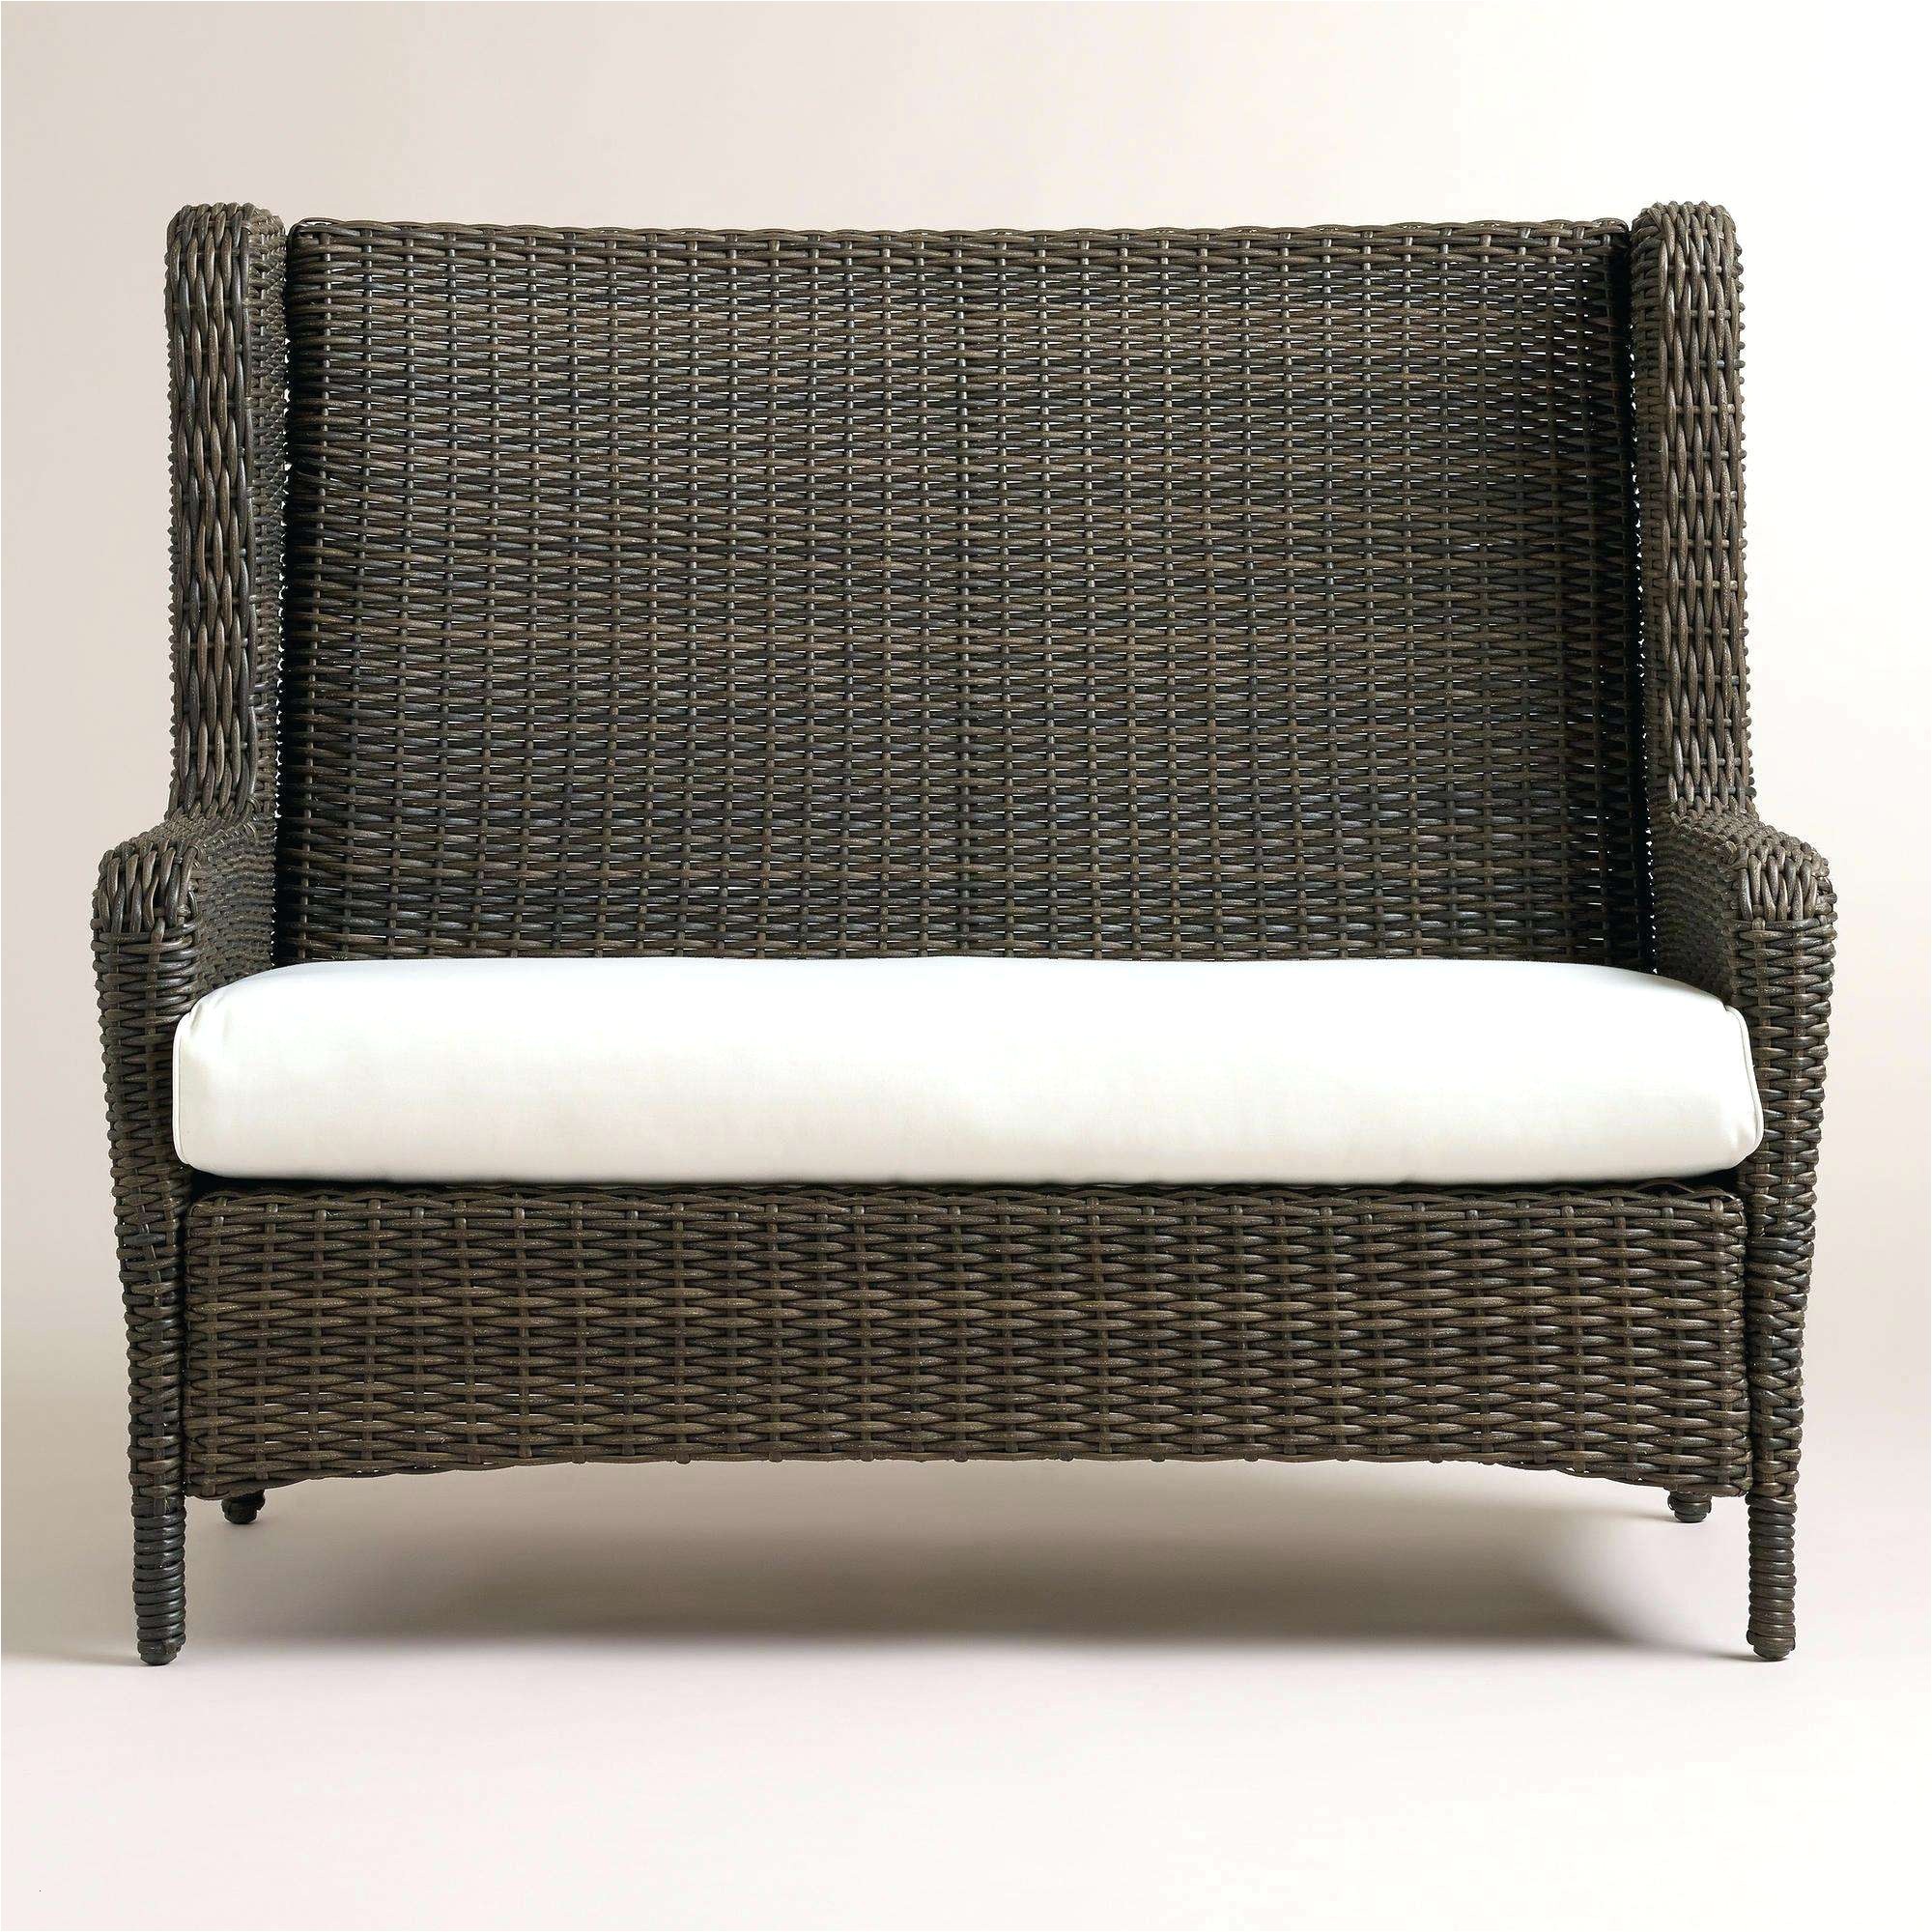 outdoor sectional replacement cushions new wicker outdoor sofa 0d patio chairs sale replacement cushions ideas